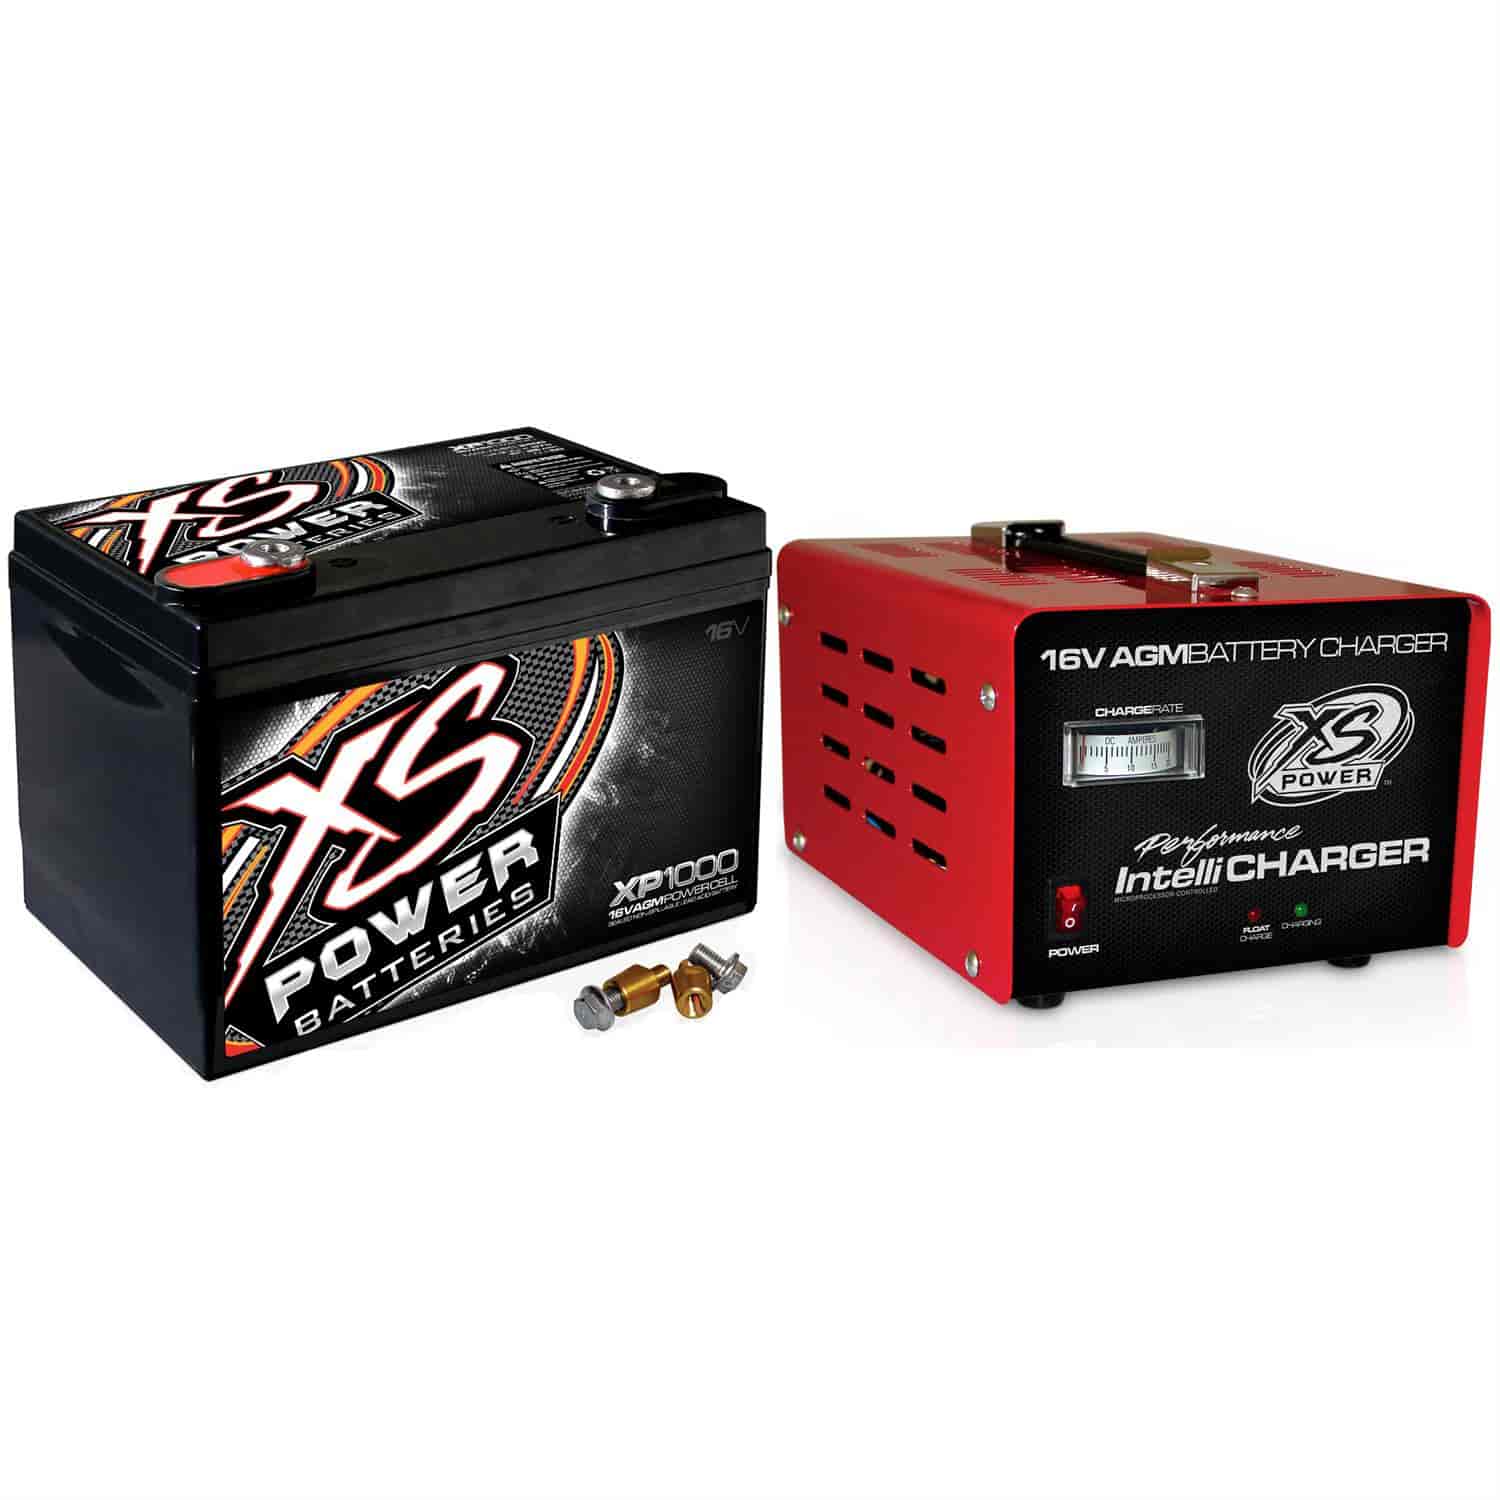 XP-Series AGM Battery & Charger Kit 16-Volt